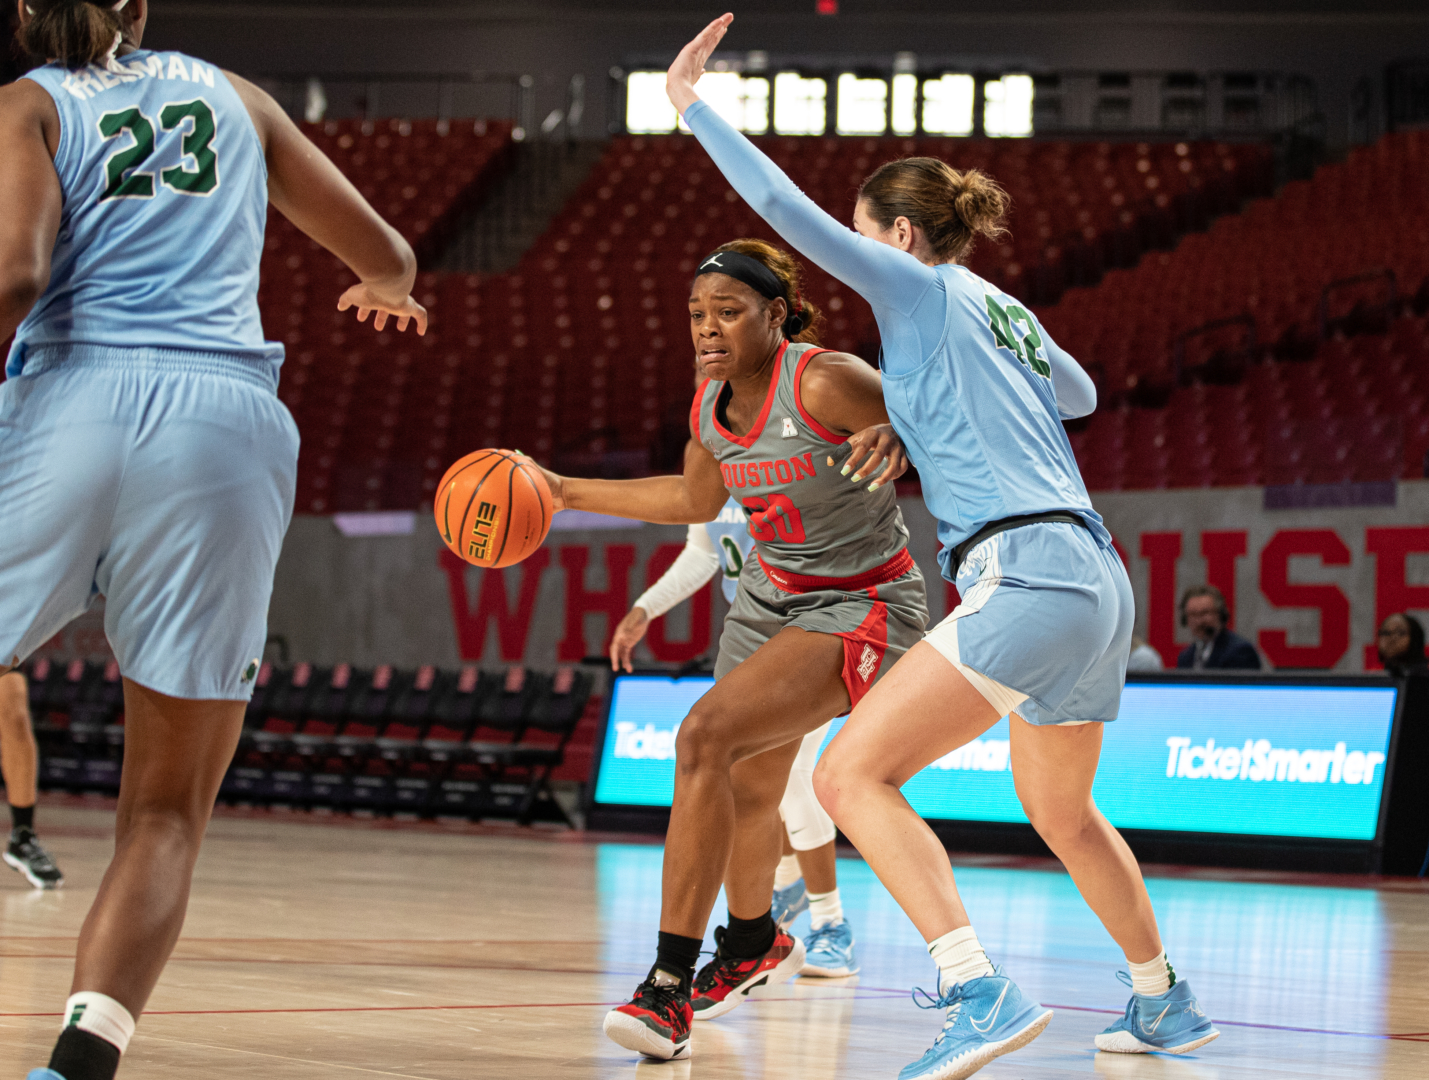 Forward Tatyana Hill scored 11 points to go along with 11 rebounds in the victory for UH women's basketball over SMU on Sunday. | Sean Thomas/The Cougar